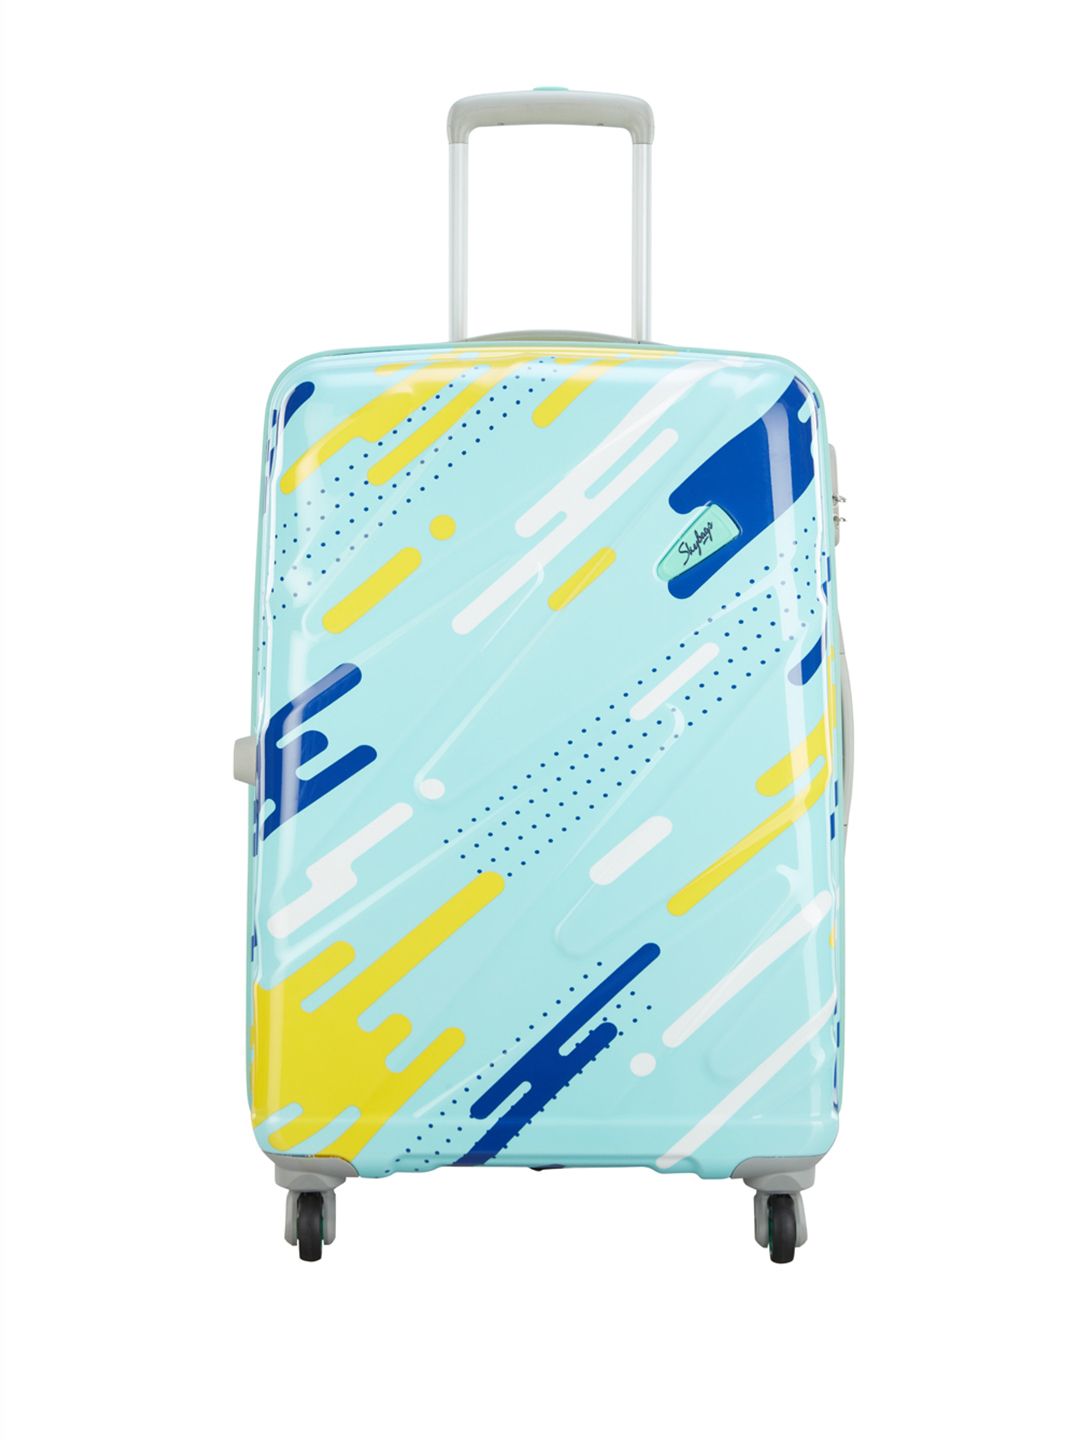 Skybags Blue Shooting Star 69 360 Medium Trolley Suitcase Price in India